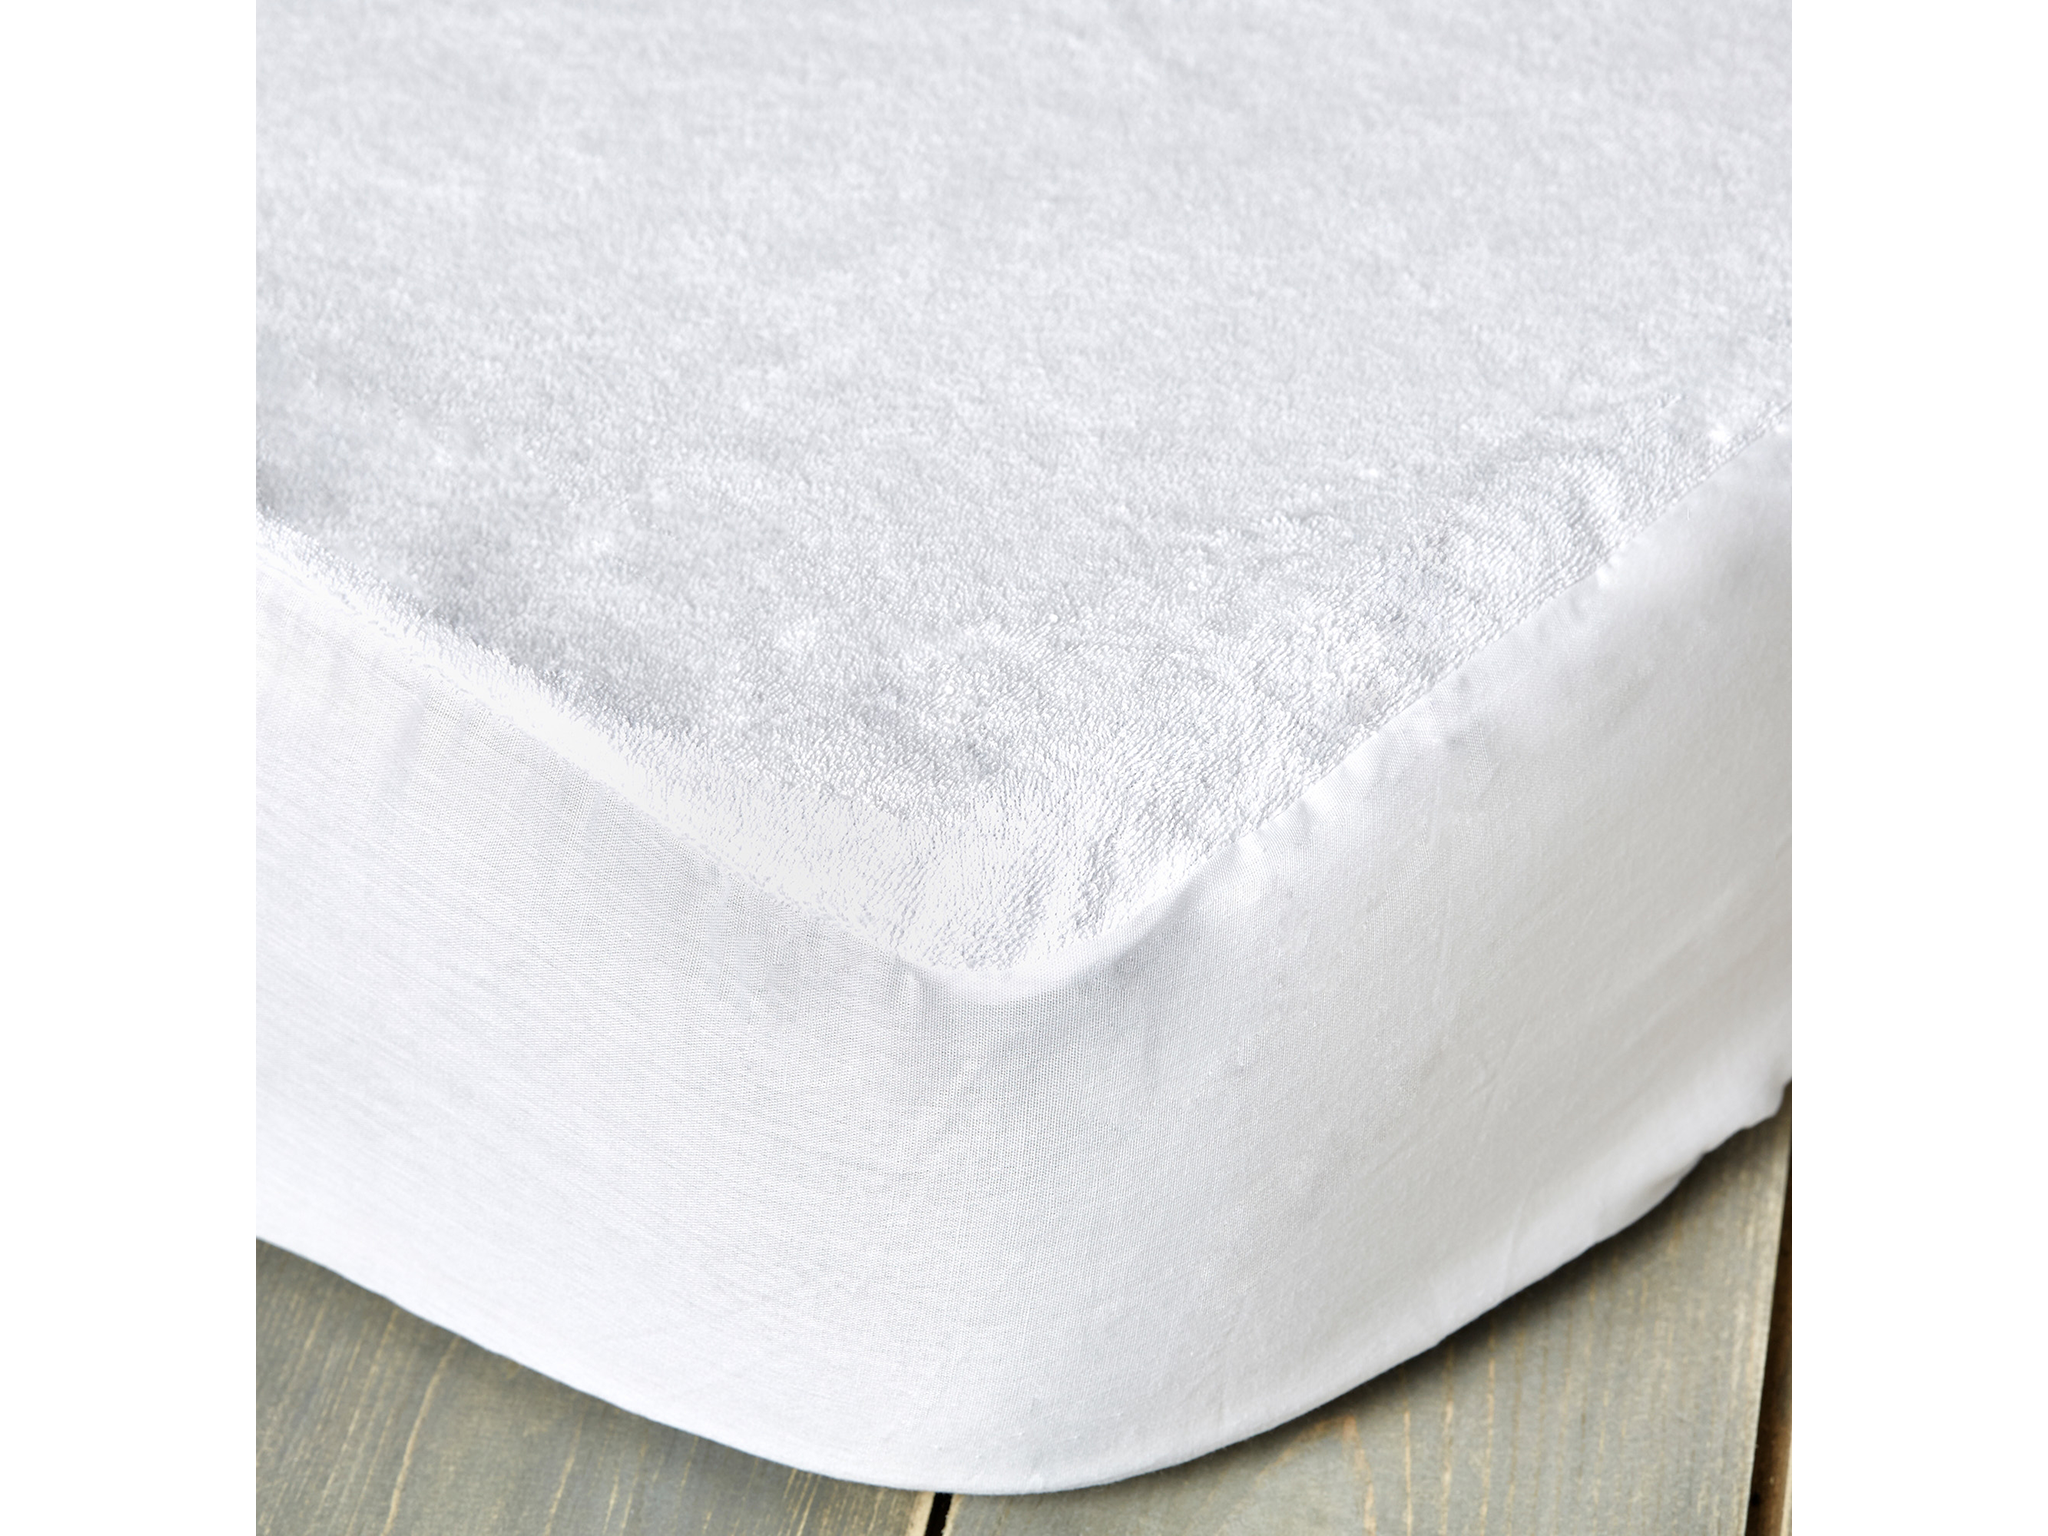 Staydrynights terry towelling waterproof mattress protector